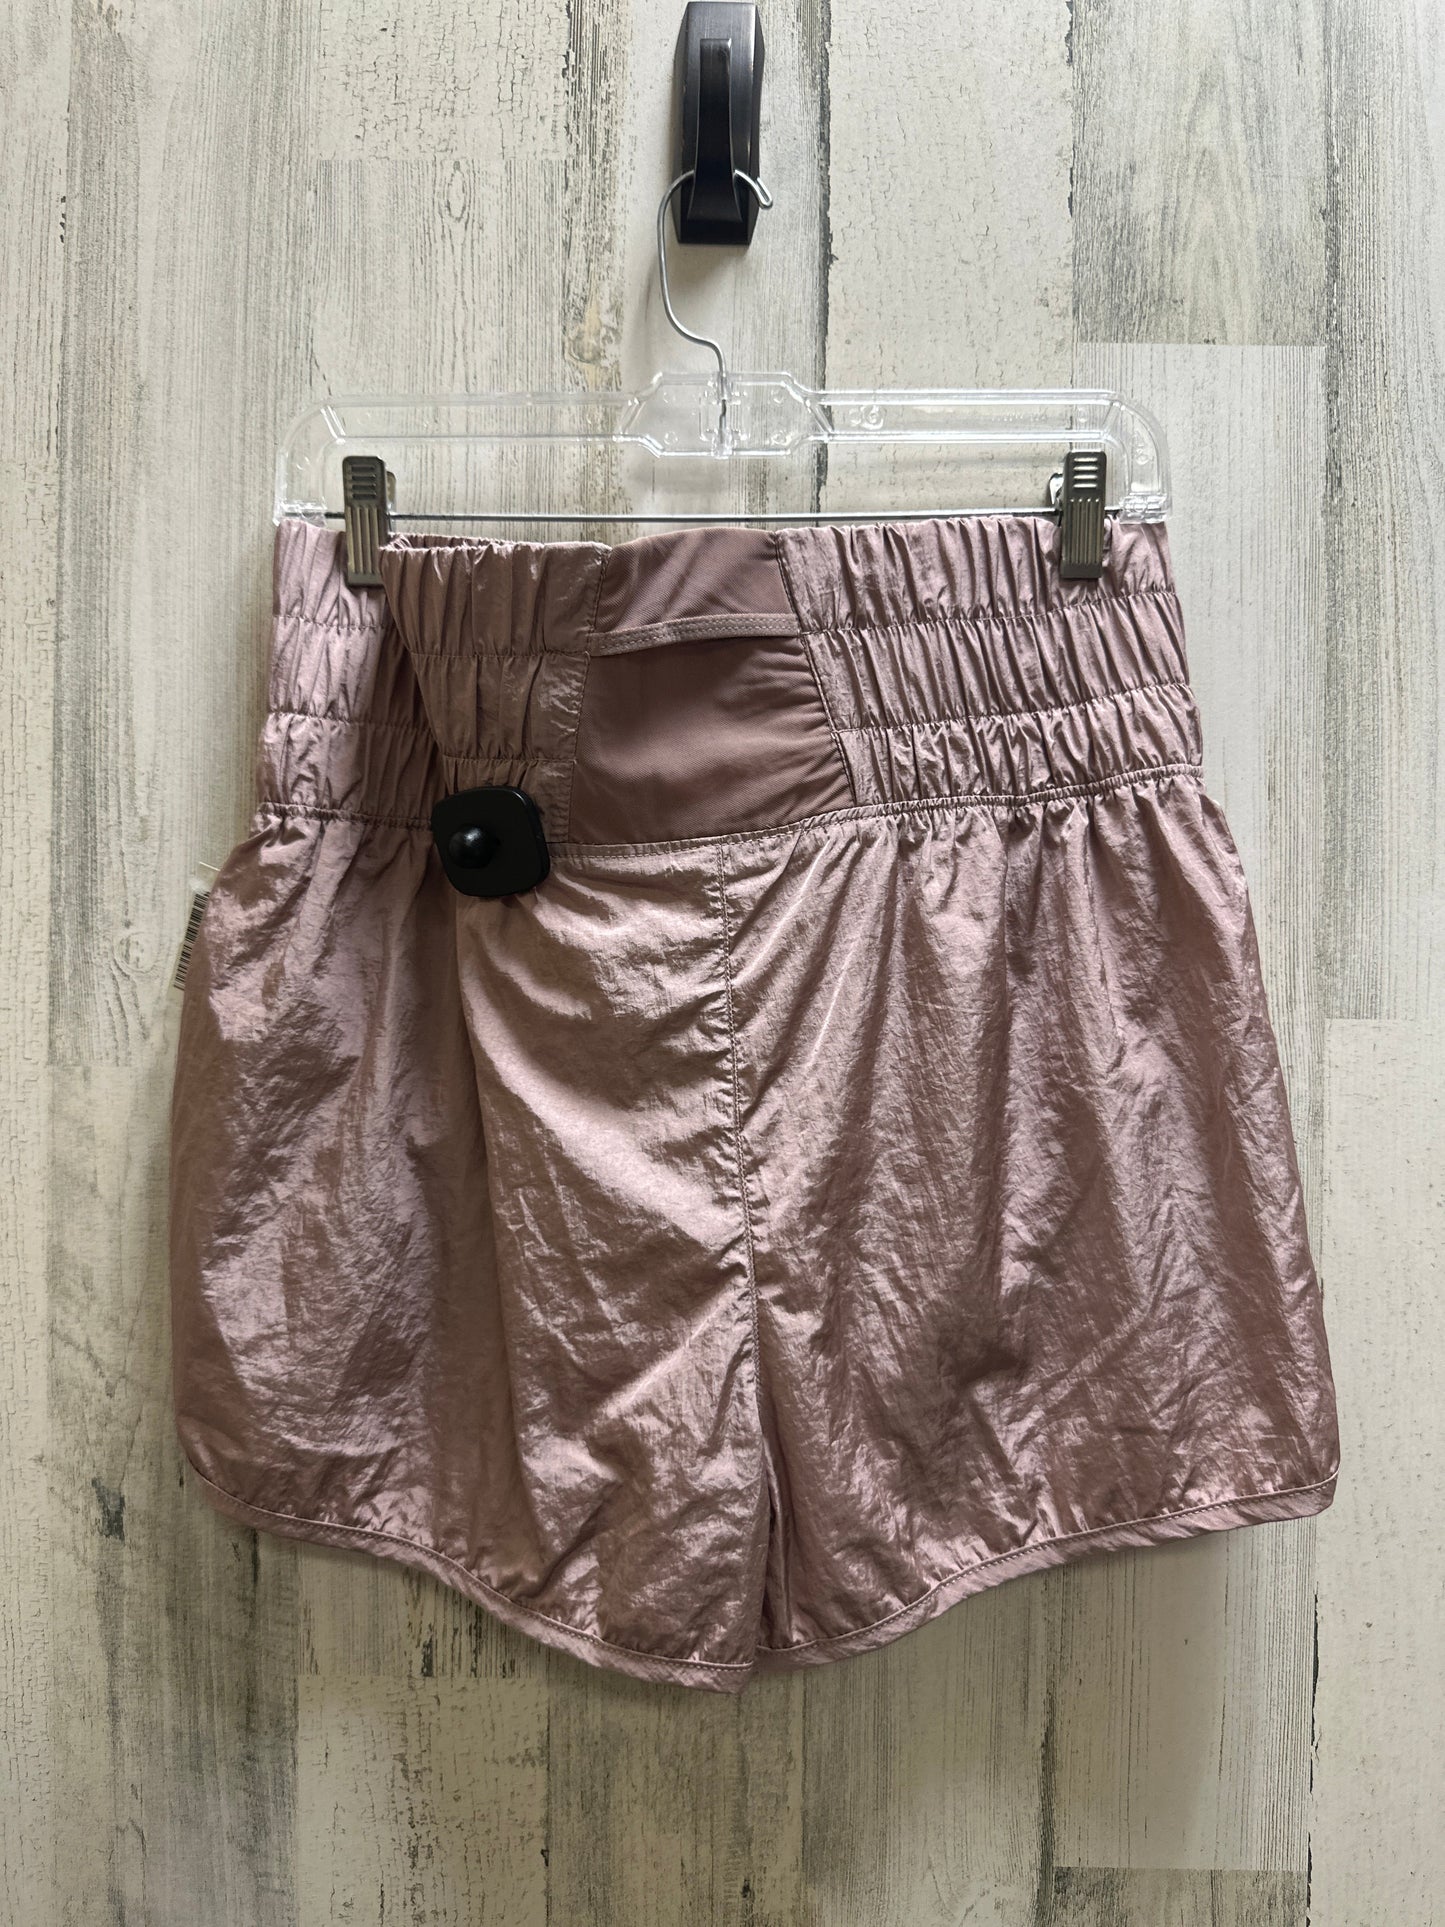 Pink Athletic Shorts Free People, Size Xl